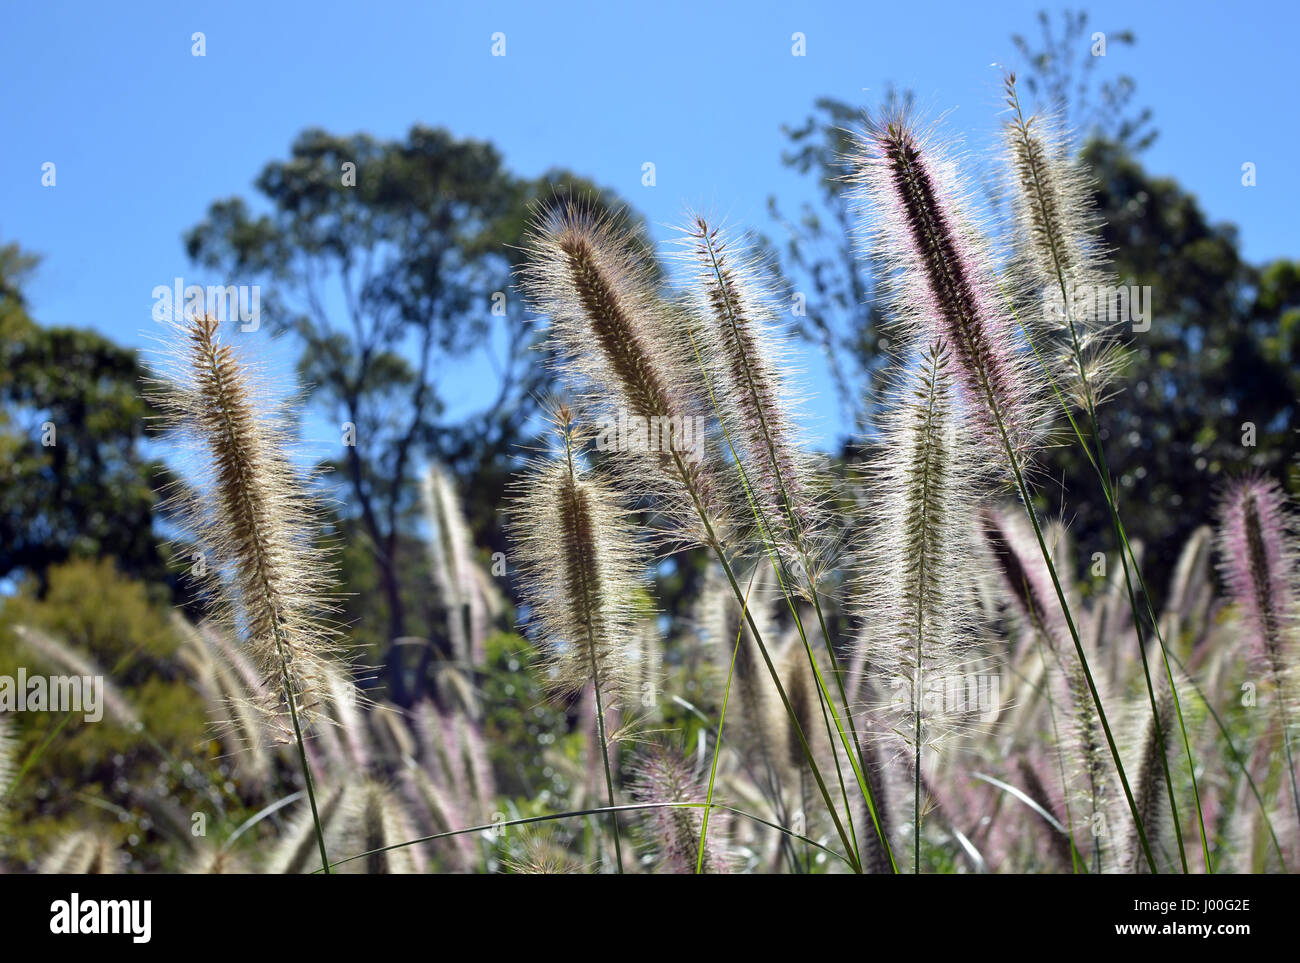 Sunlight shining through the feathery flowerheads of the native Australian grass Swamp Foxtail, Cenchrus purpurascens. Also known as Fountain Grass. Stock Photo